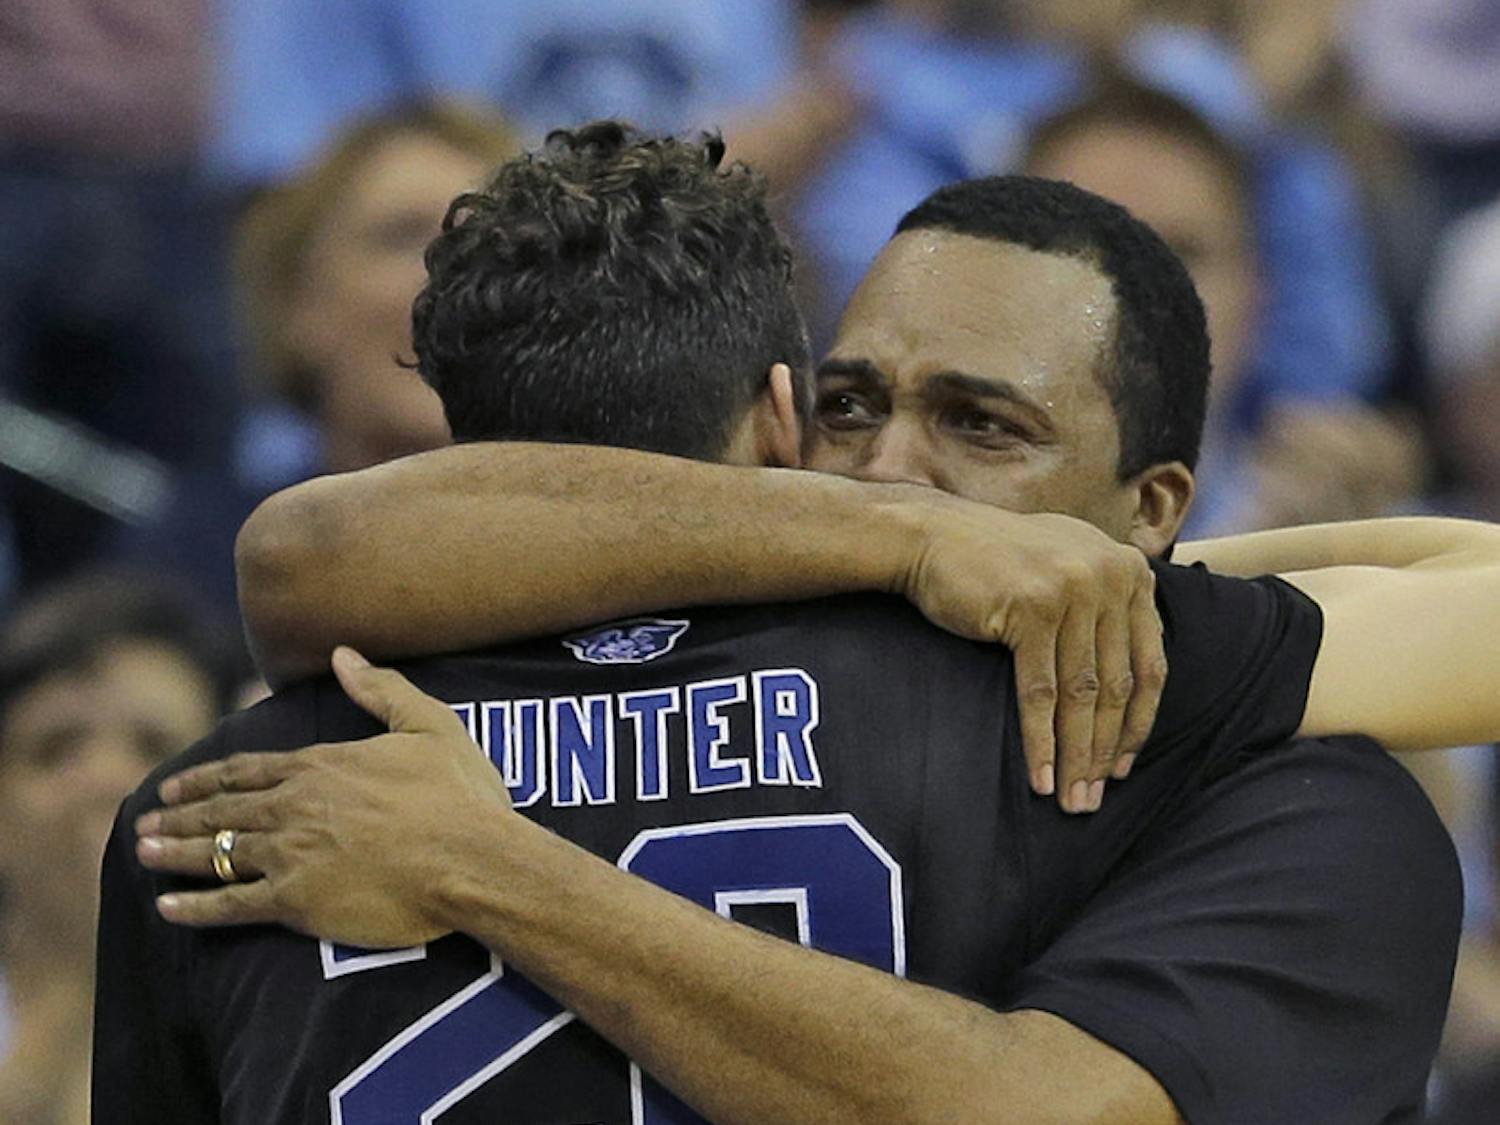 Georgia State head coach Ron Hunter hugs his son R.J. after taking him out of the game against Xavier during the second half of GSU's 75-67 loss on Saturday in the third round of the NCAA Tournament in Jacksonville.